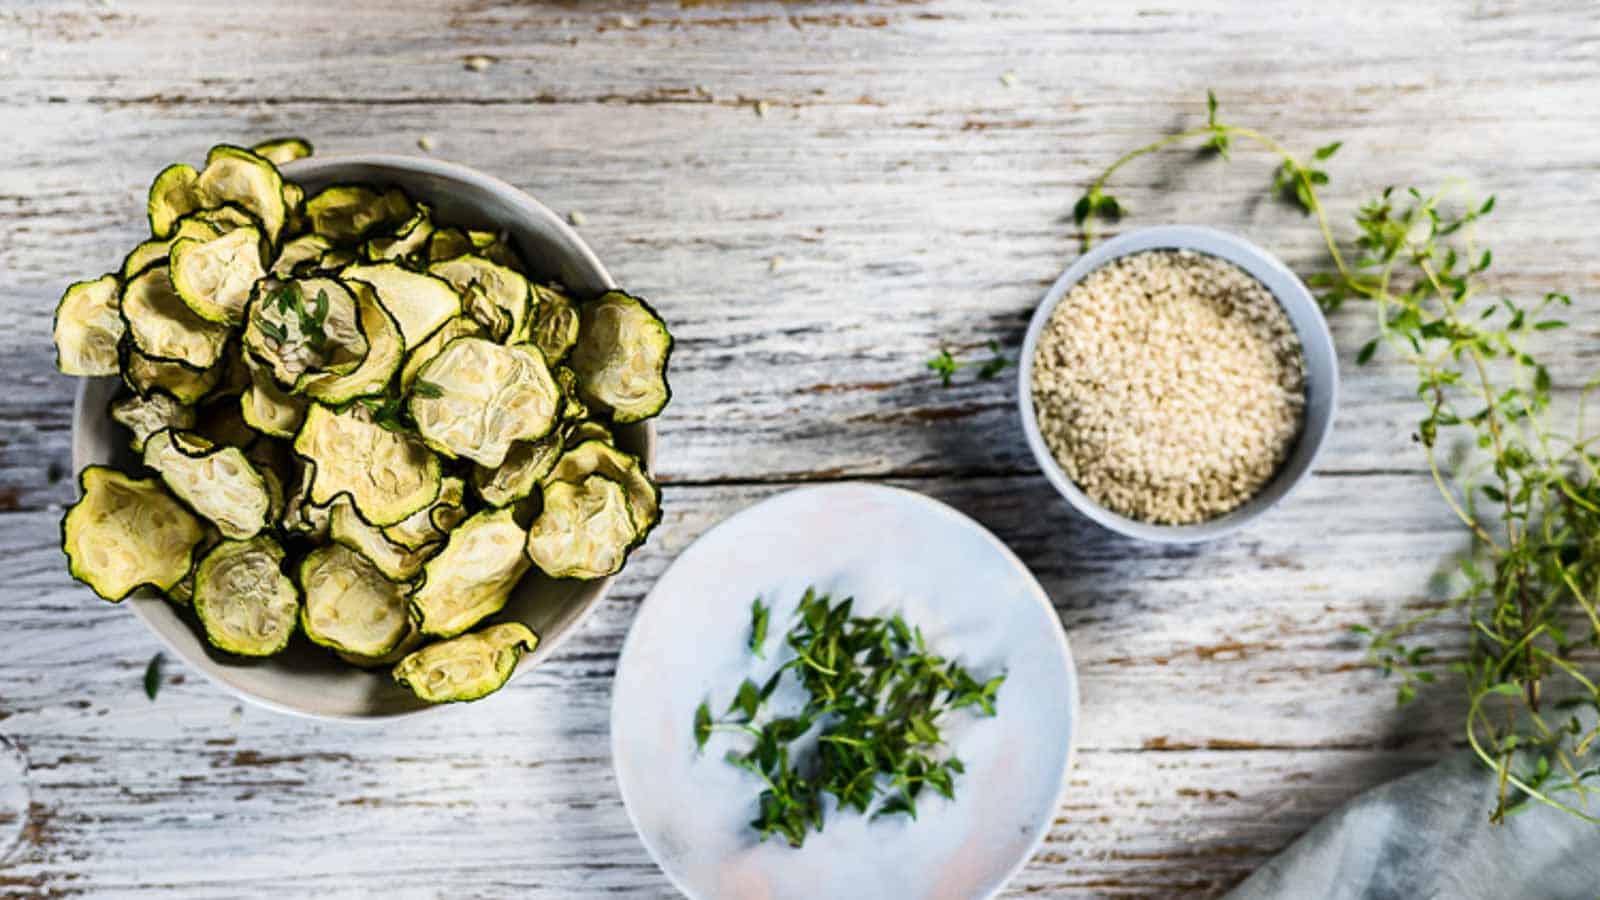 Zesty Zucchini Chips. Photo credit: Low Carb – No Carb.